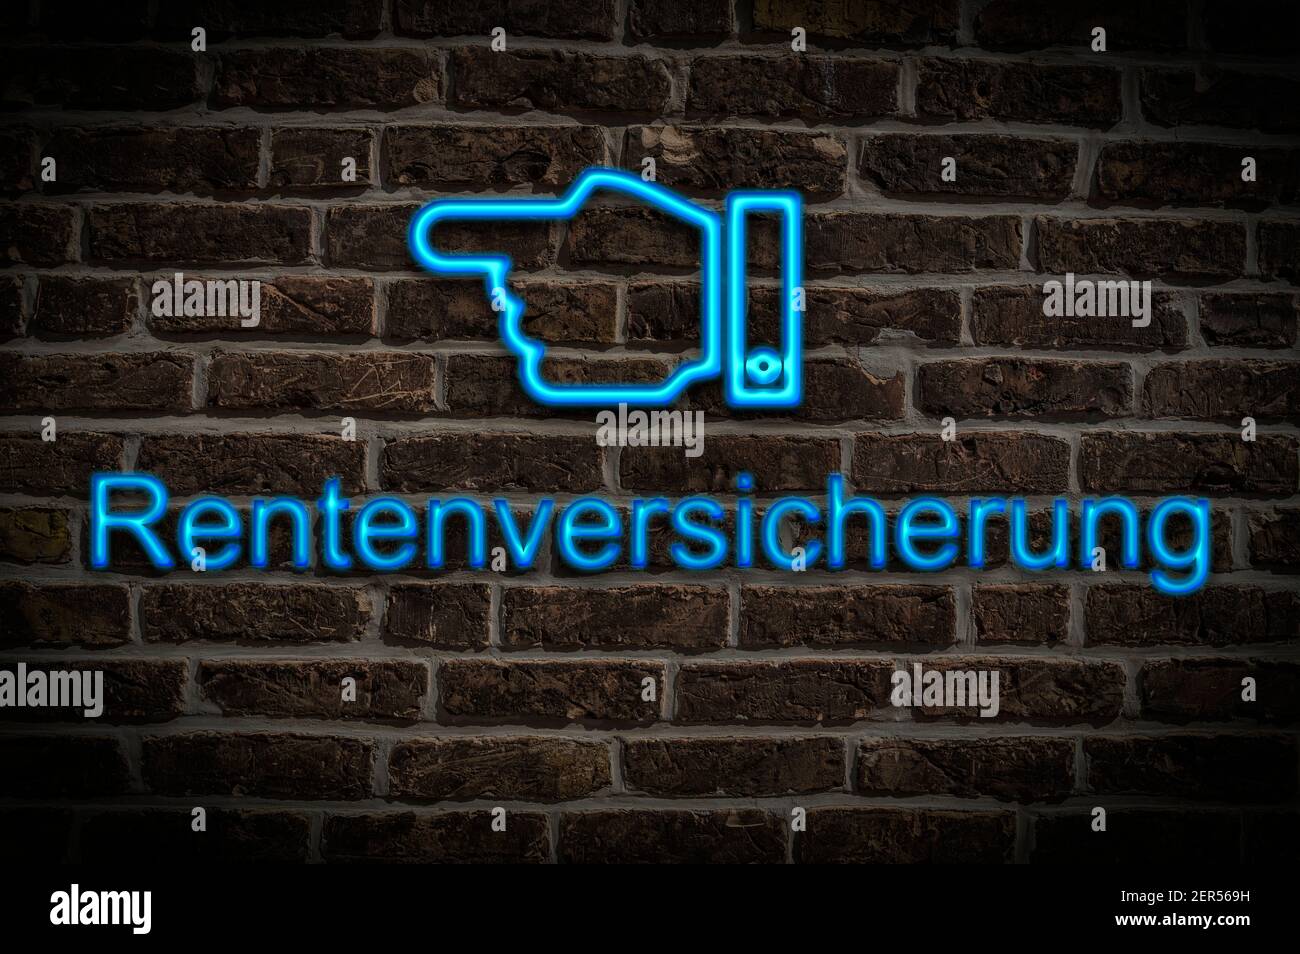 Detail photo of a neon sign on a wall with the inscription Rentenversicherung (Pension insurance) Stock Photo